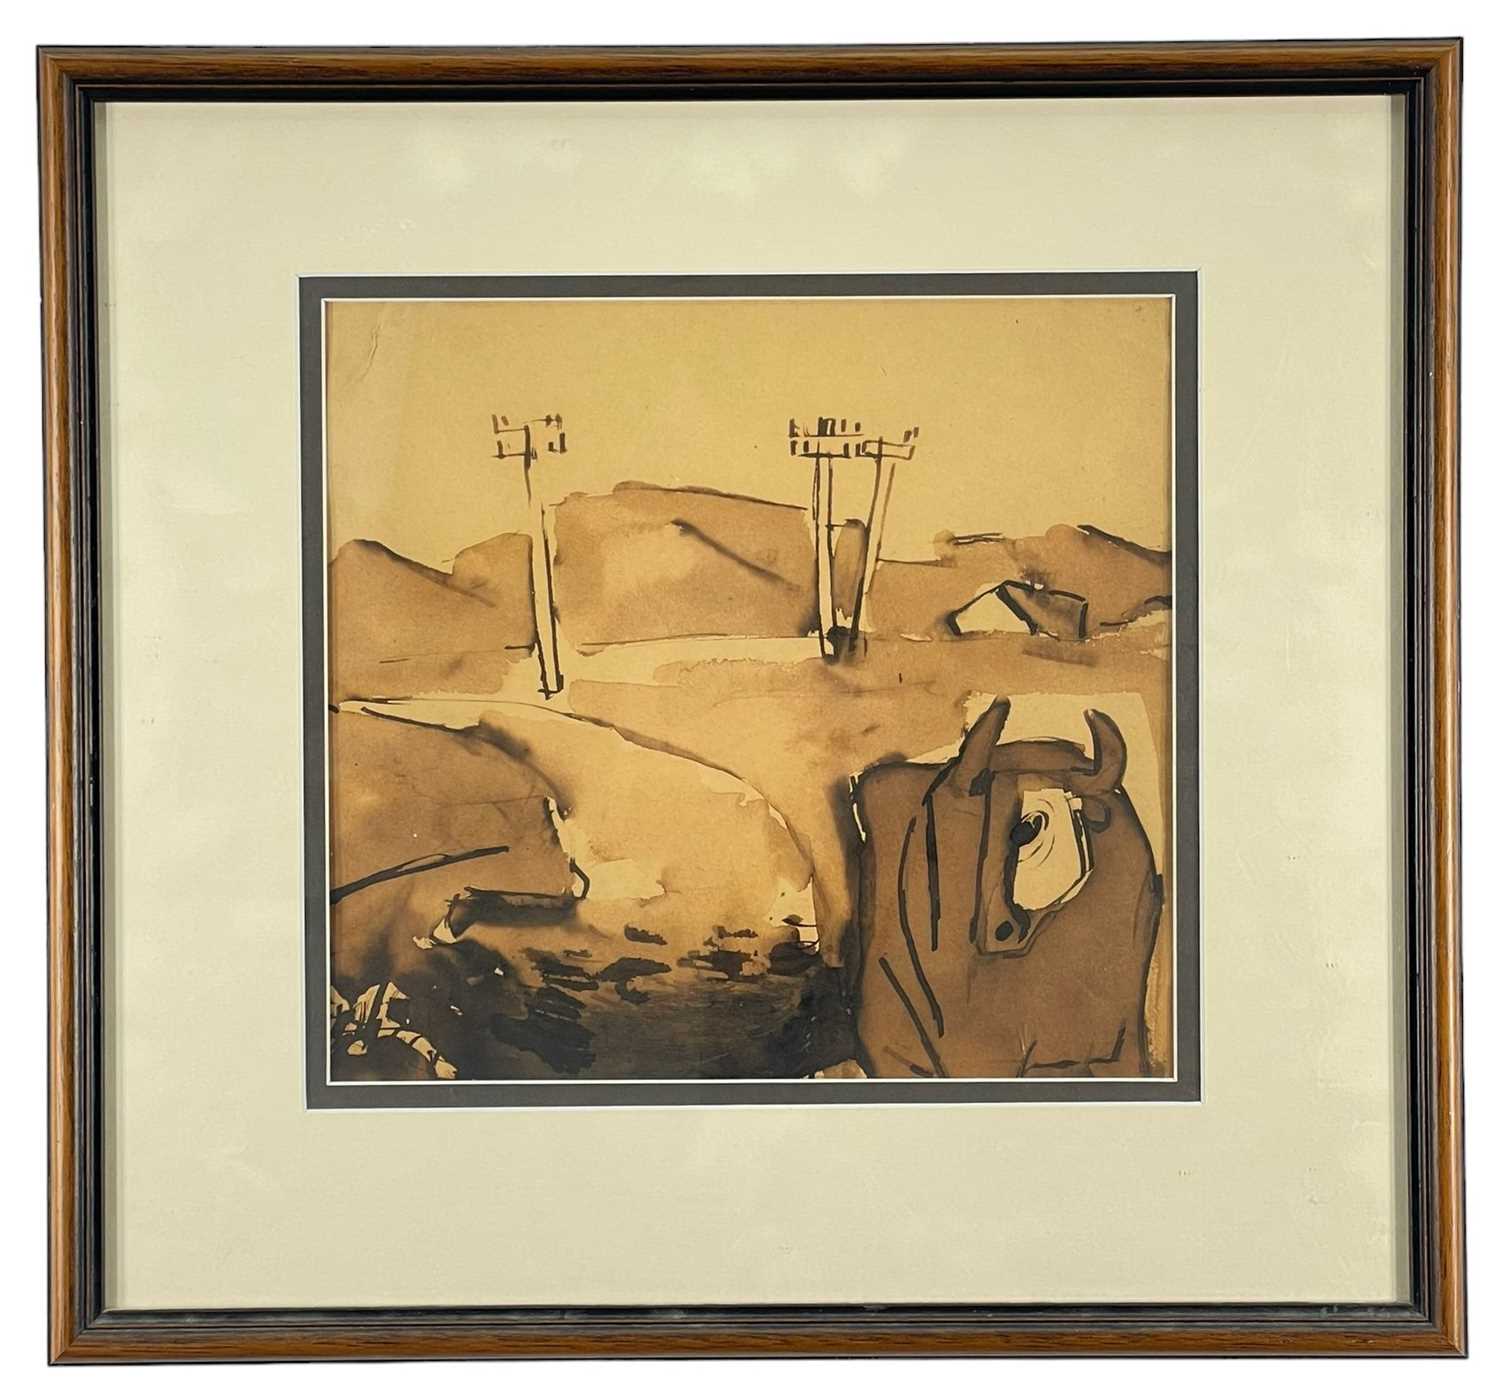 ‡ JOSEF HERMAN OBE RA pen and ink sketch - standing cow with telegraph poles behind, - Image 2 of 2